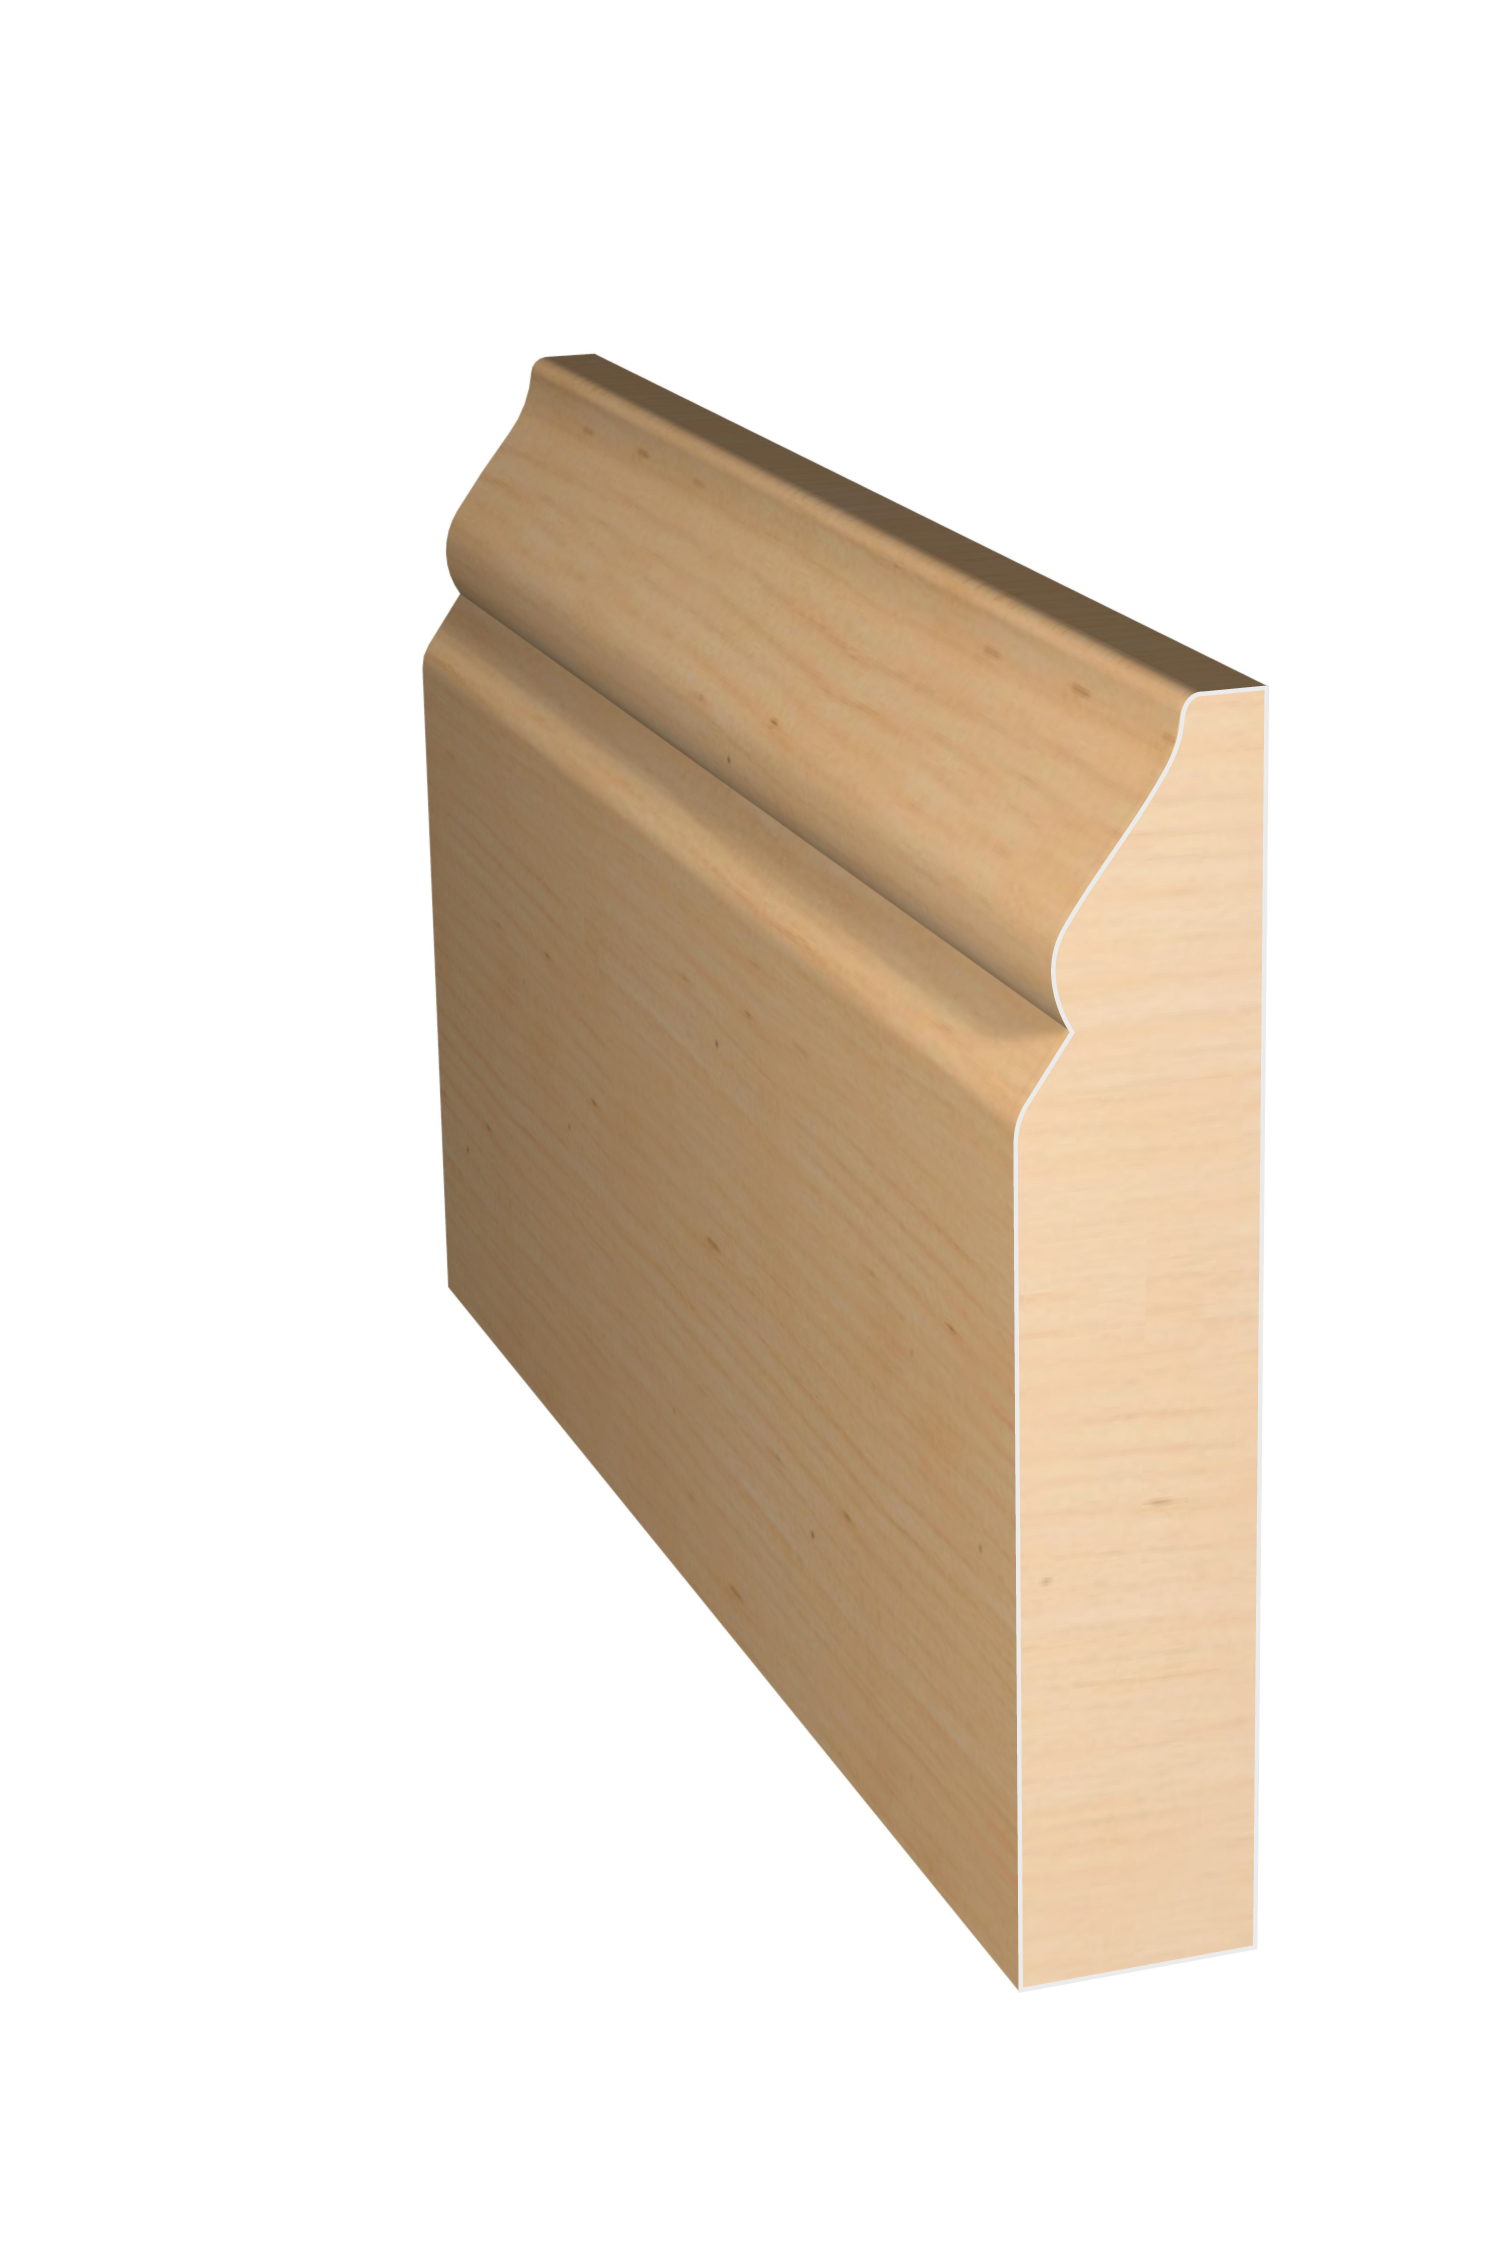 Three dimensional rendering of custom casing wood molding CAPL3127 made by Public Lumber Company in Detroit.